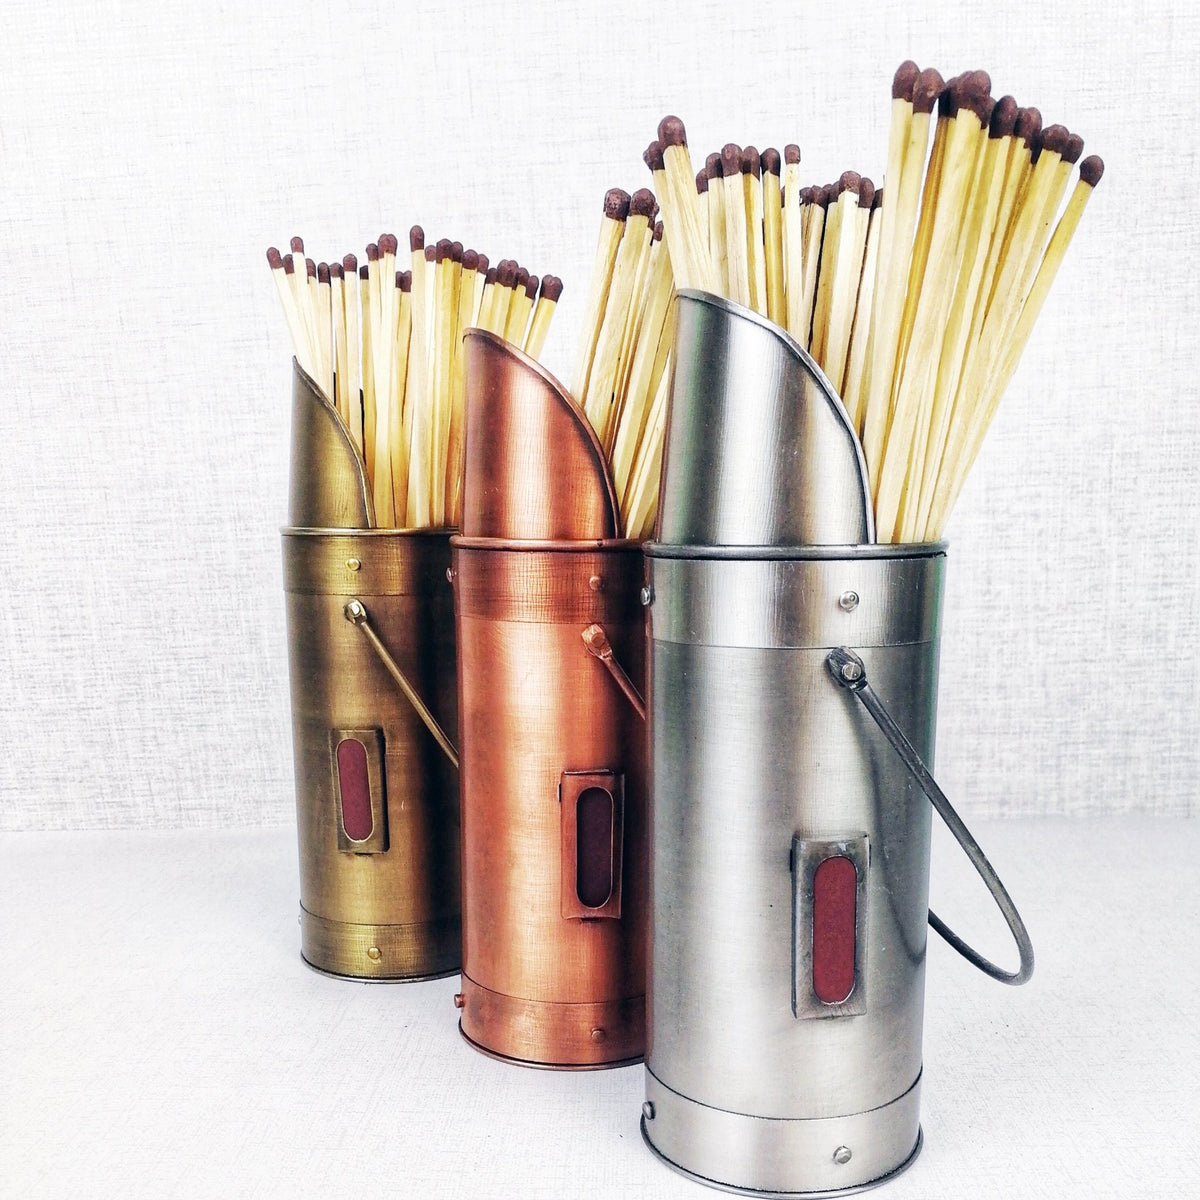 Matchstick holders bronze pewter copper against grey background